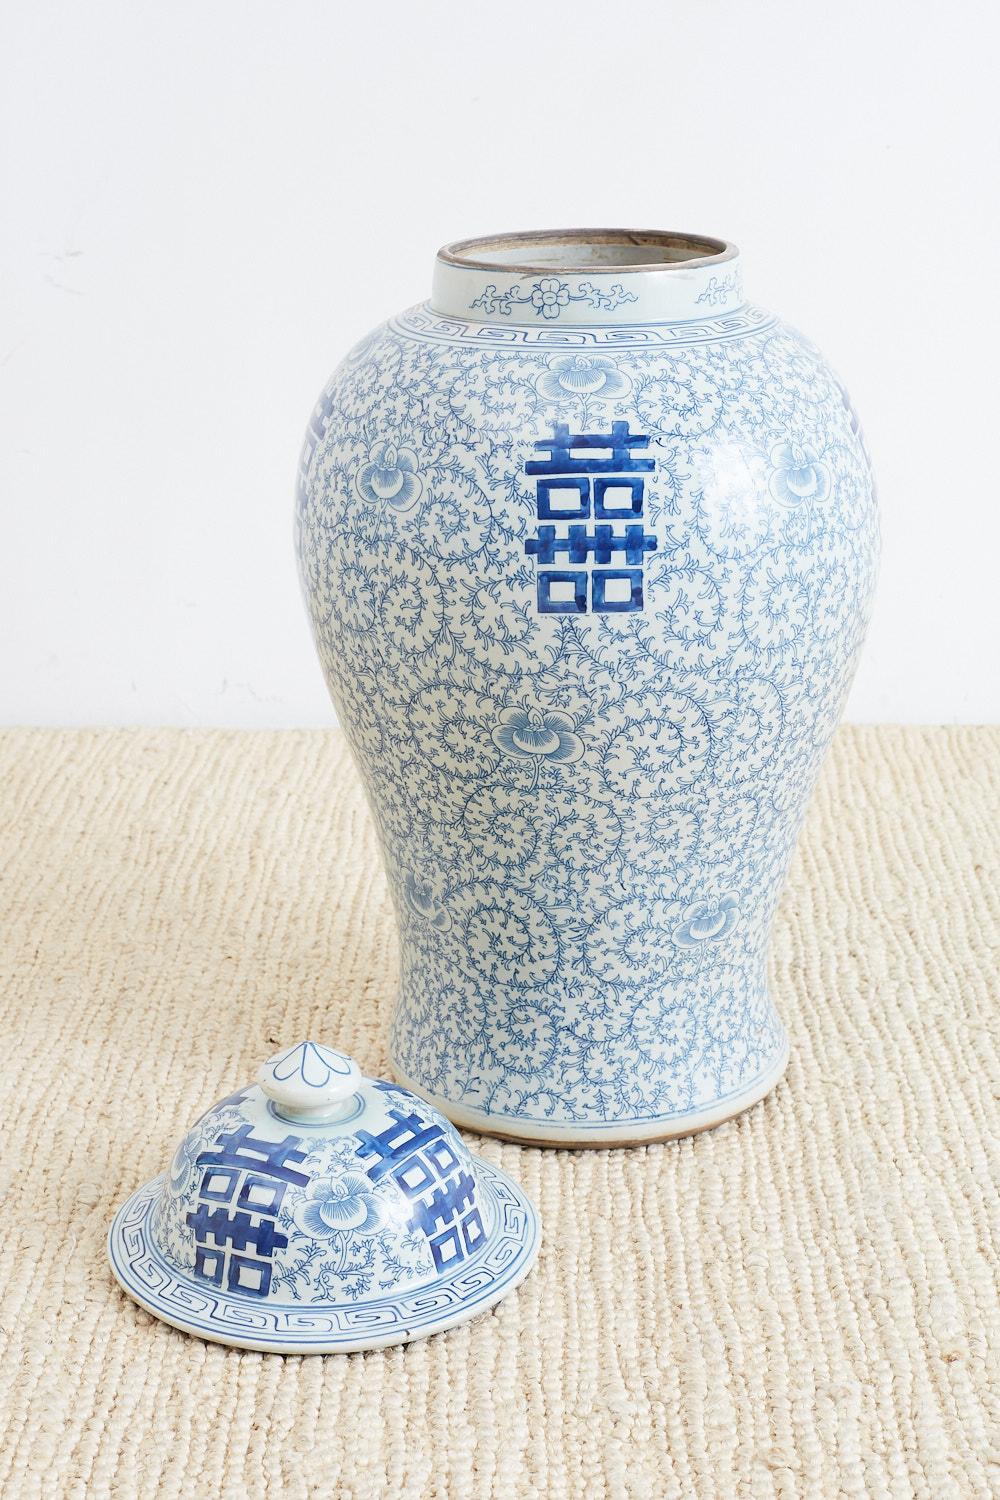 Gorgeous pair of large Chinese blue and white porcelain ginger jars featuring Shuangxi double happiness or wedded bliss symbols. The large lidded jars are decorated with a scrolling vine pattern and a Greek key border on the neck and brim.